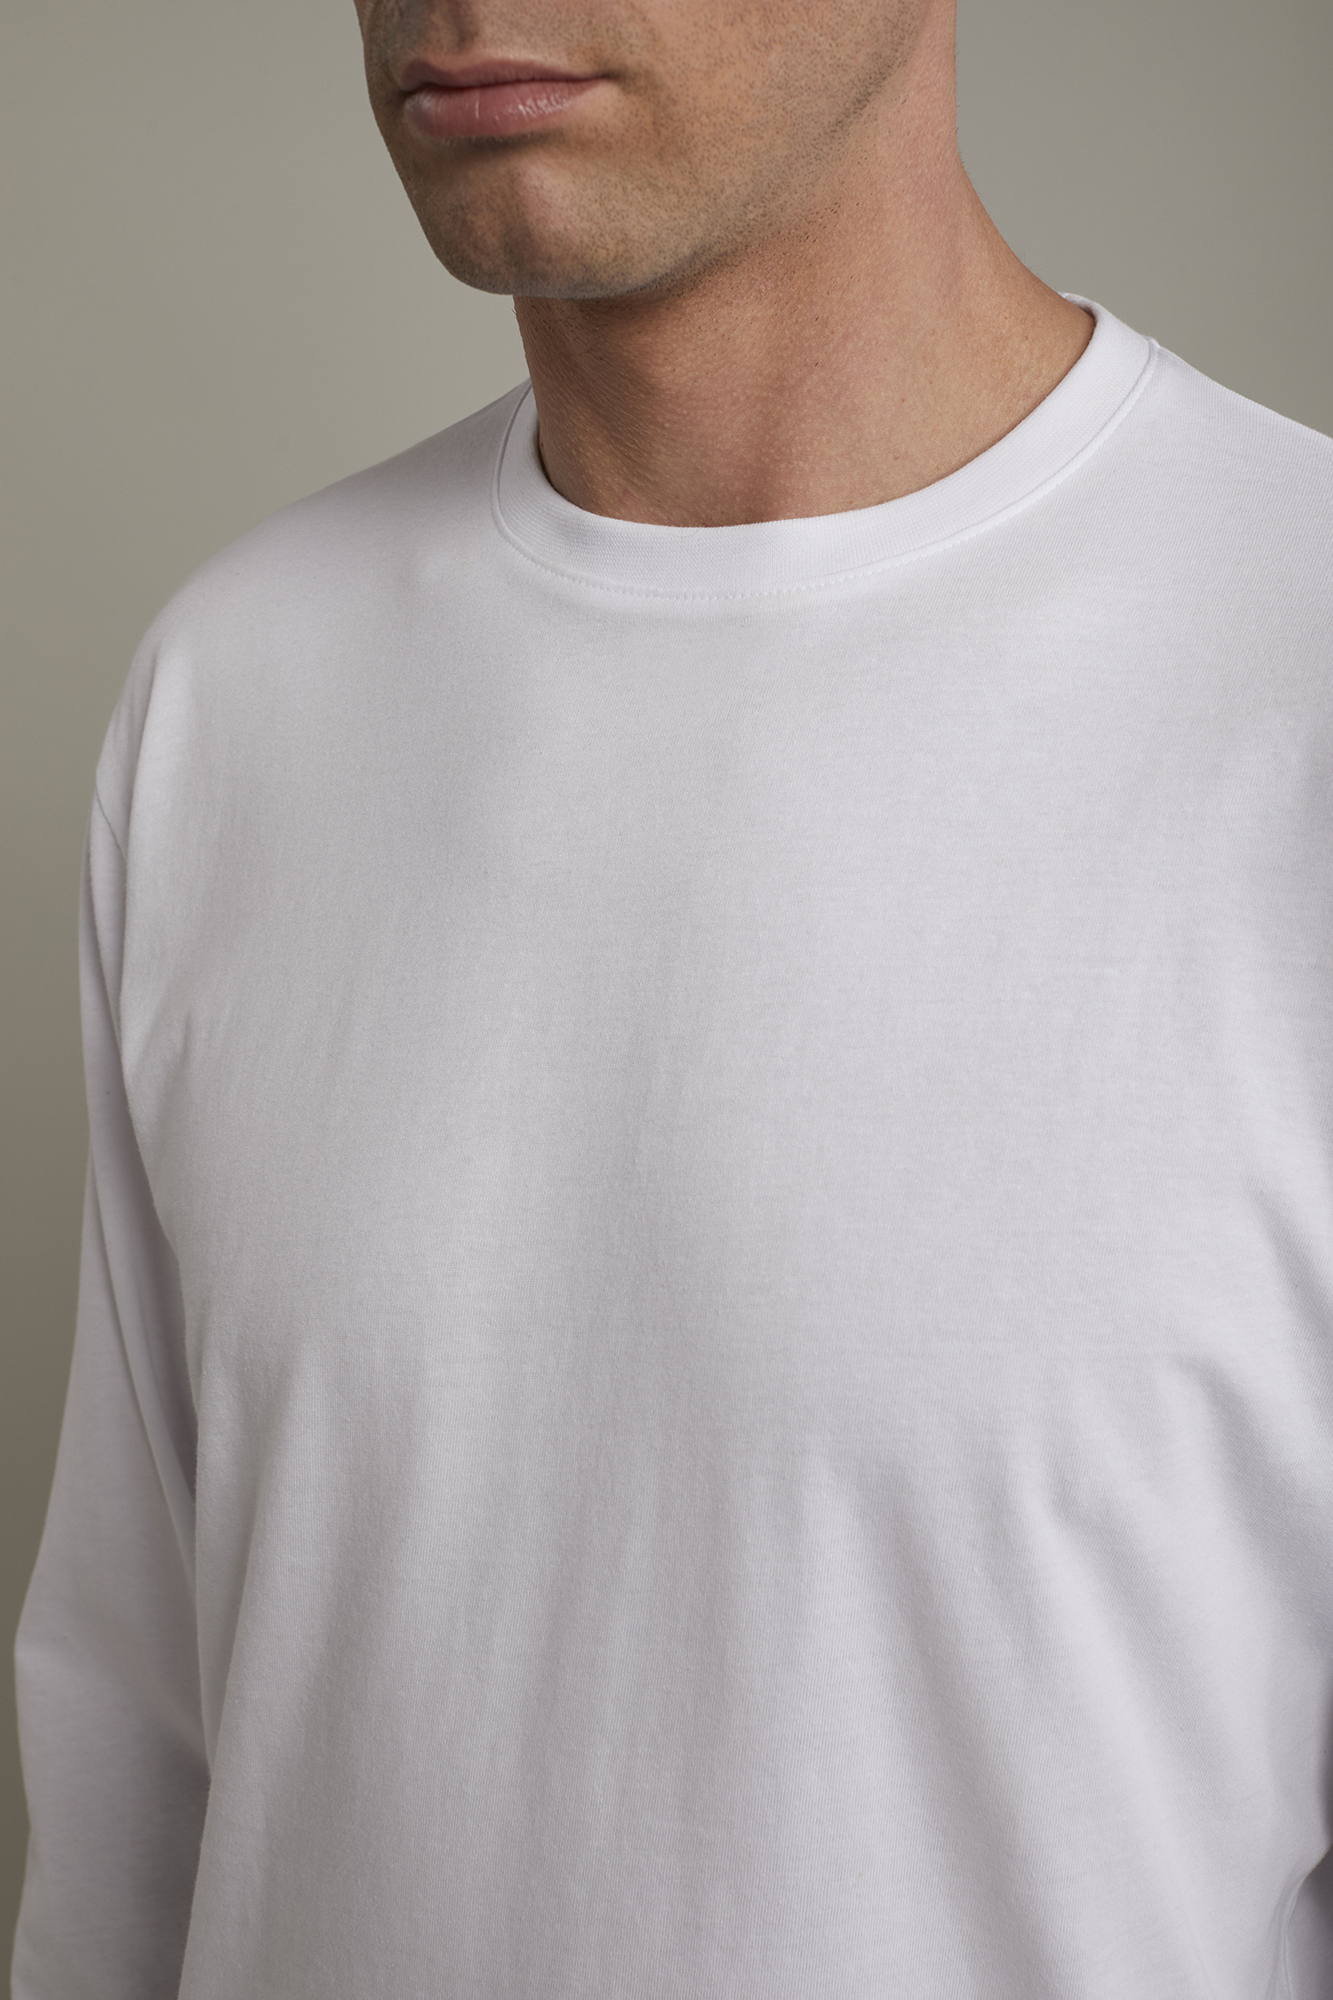 Men’s round neck t-shirt with long sleeves 100% cotton regular fit image number null